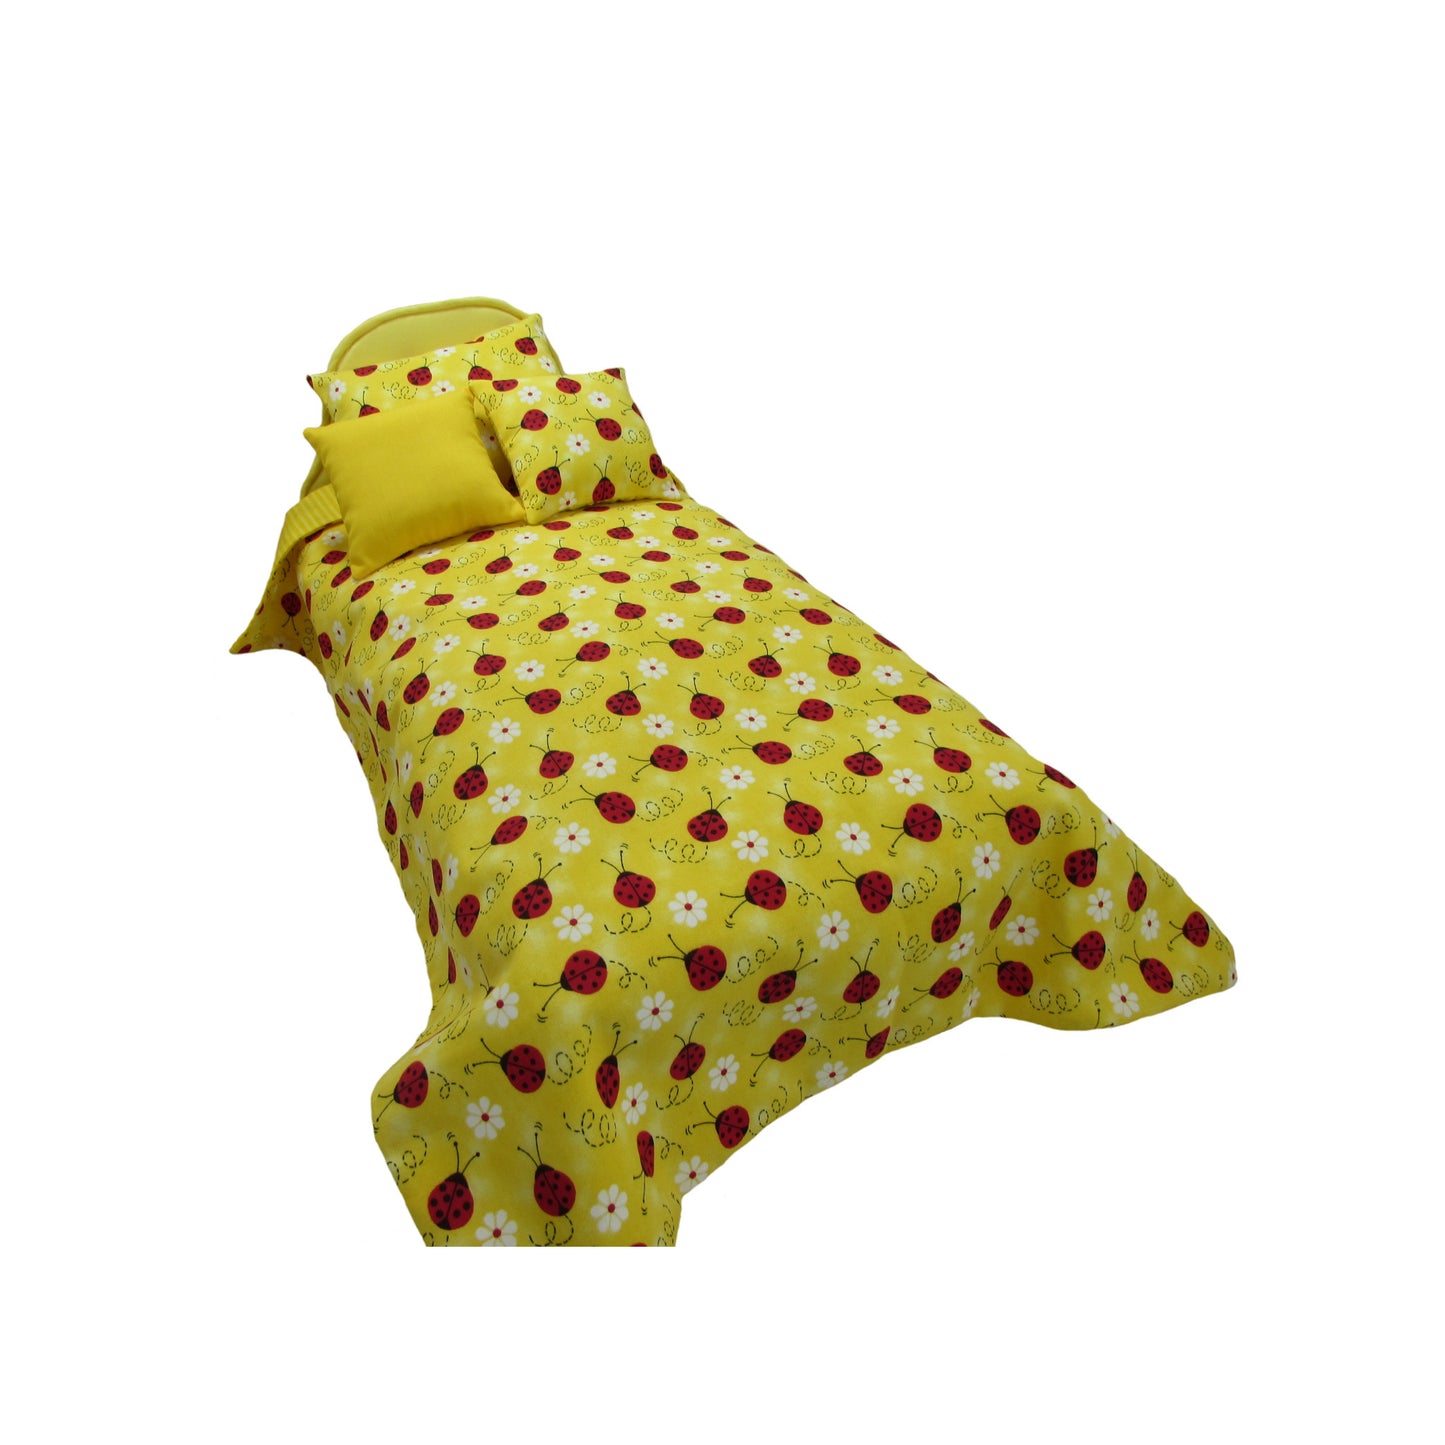 Upholstered Light Yellow Doll and Ladybug Doll Bedding for 14.5-inch dolls